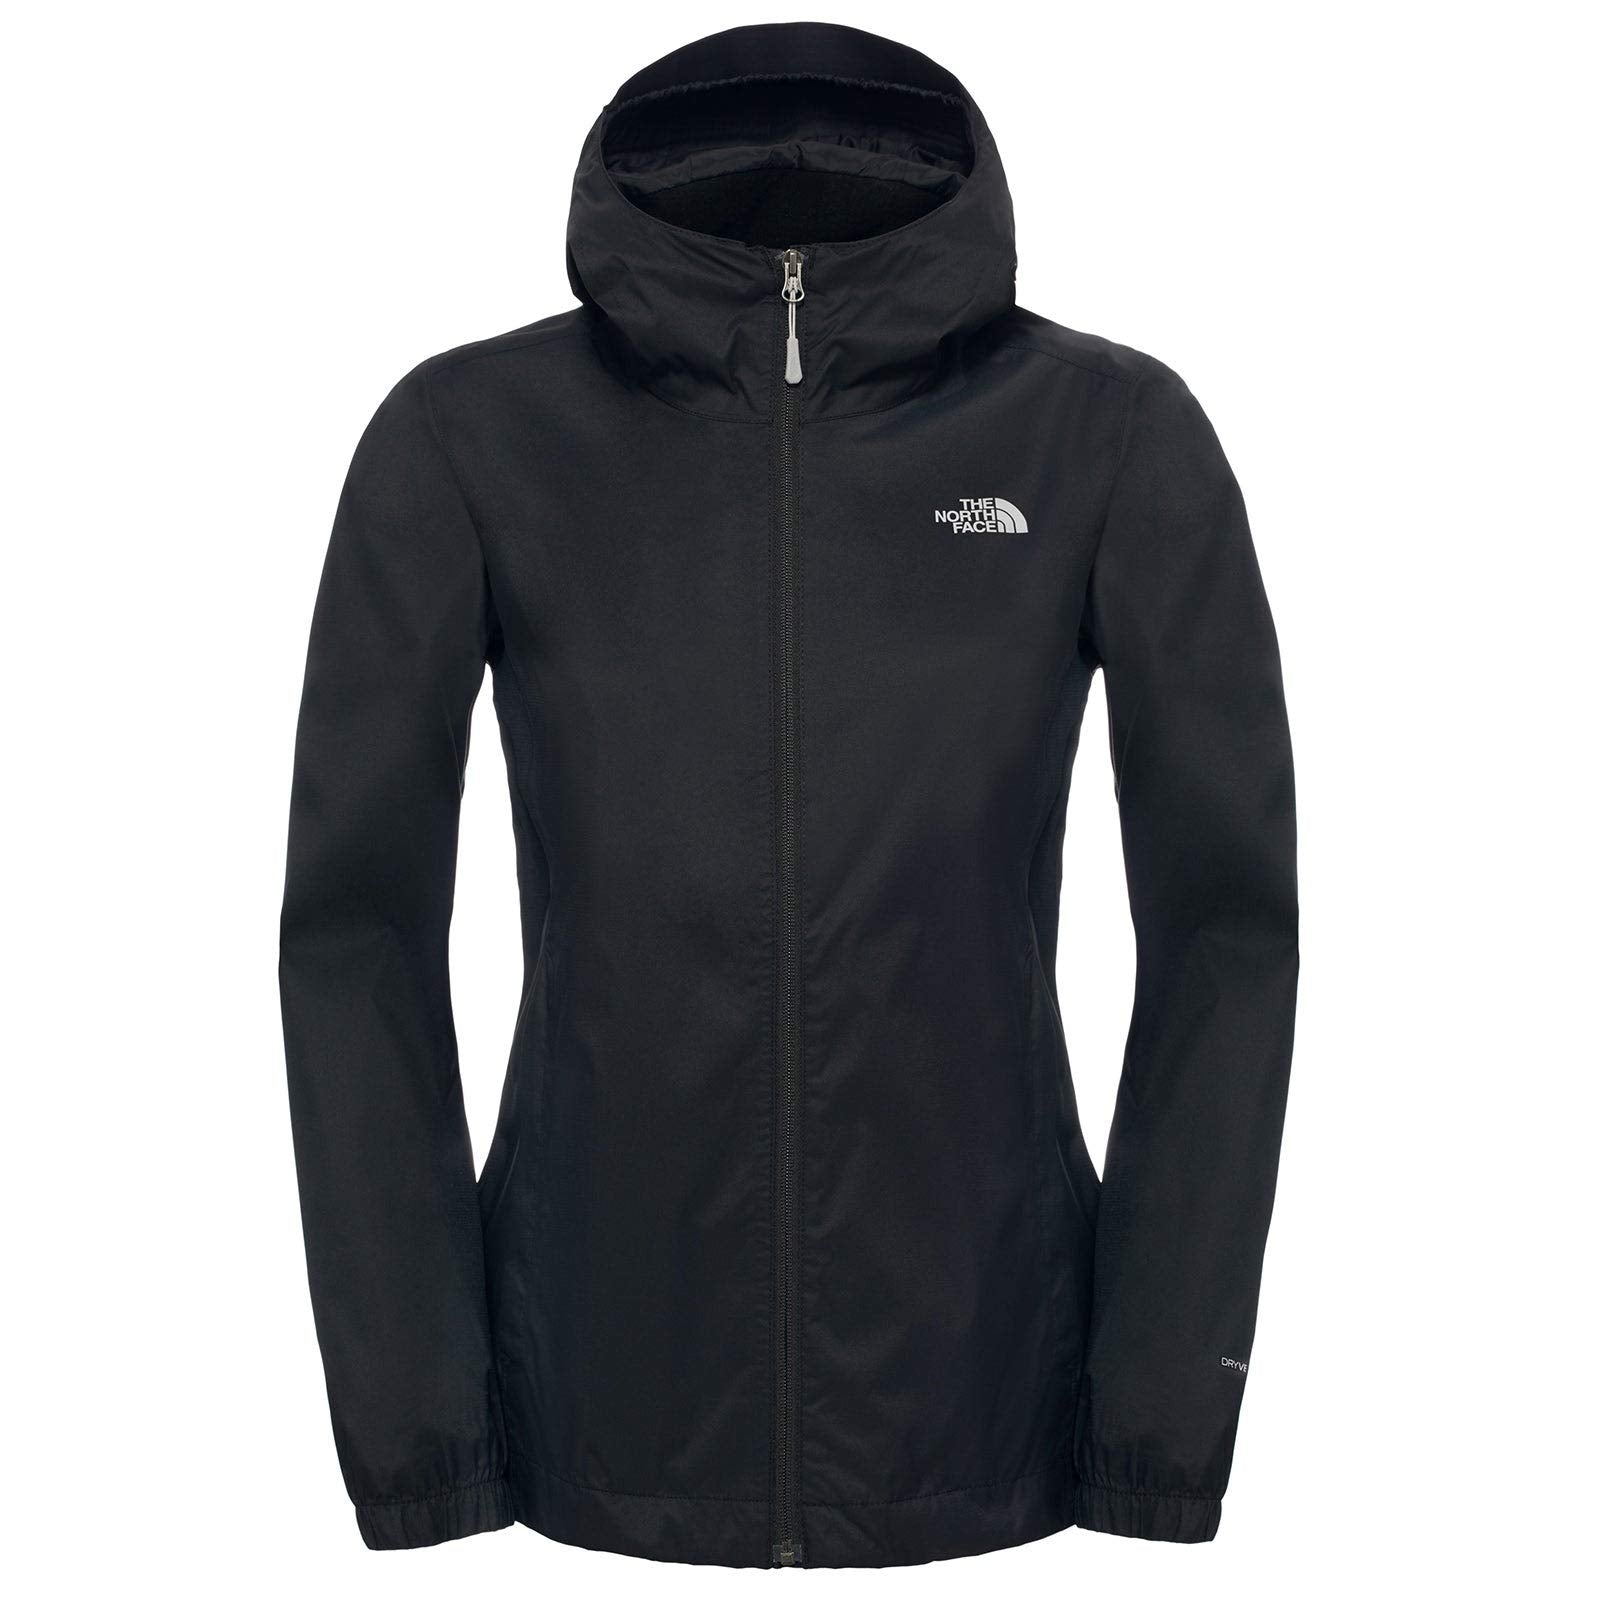 (X-Large, TNF Black) - The North Face Quest Women's Outdoor Jacket